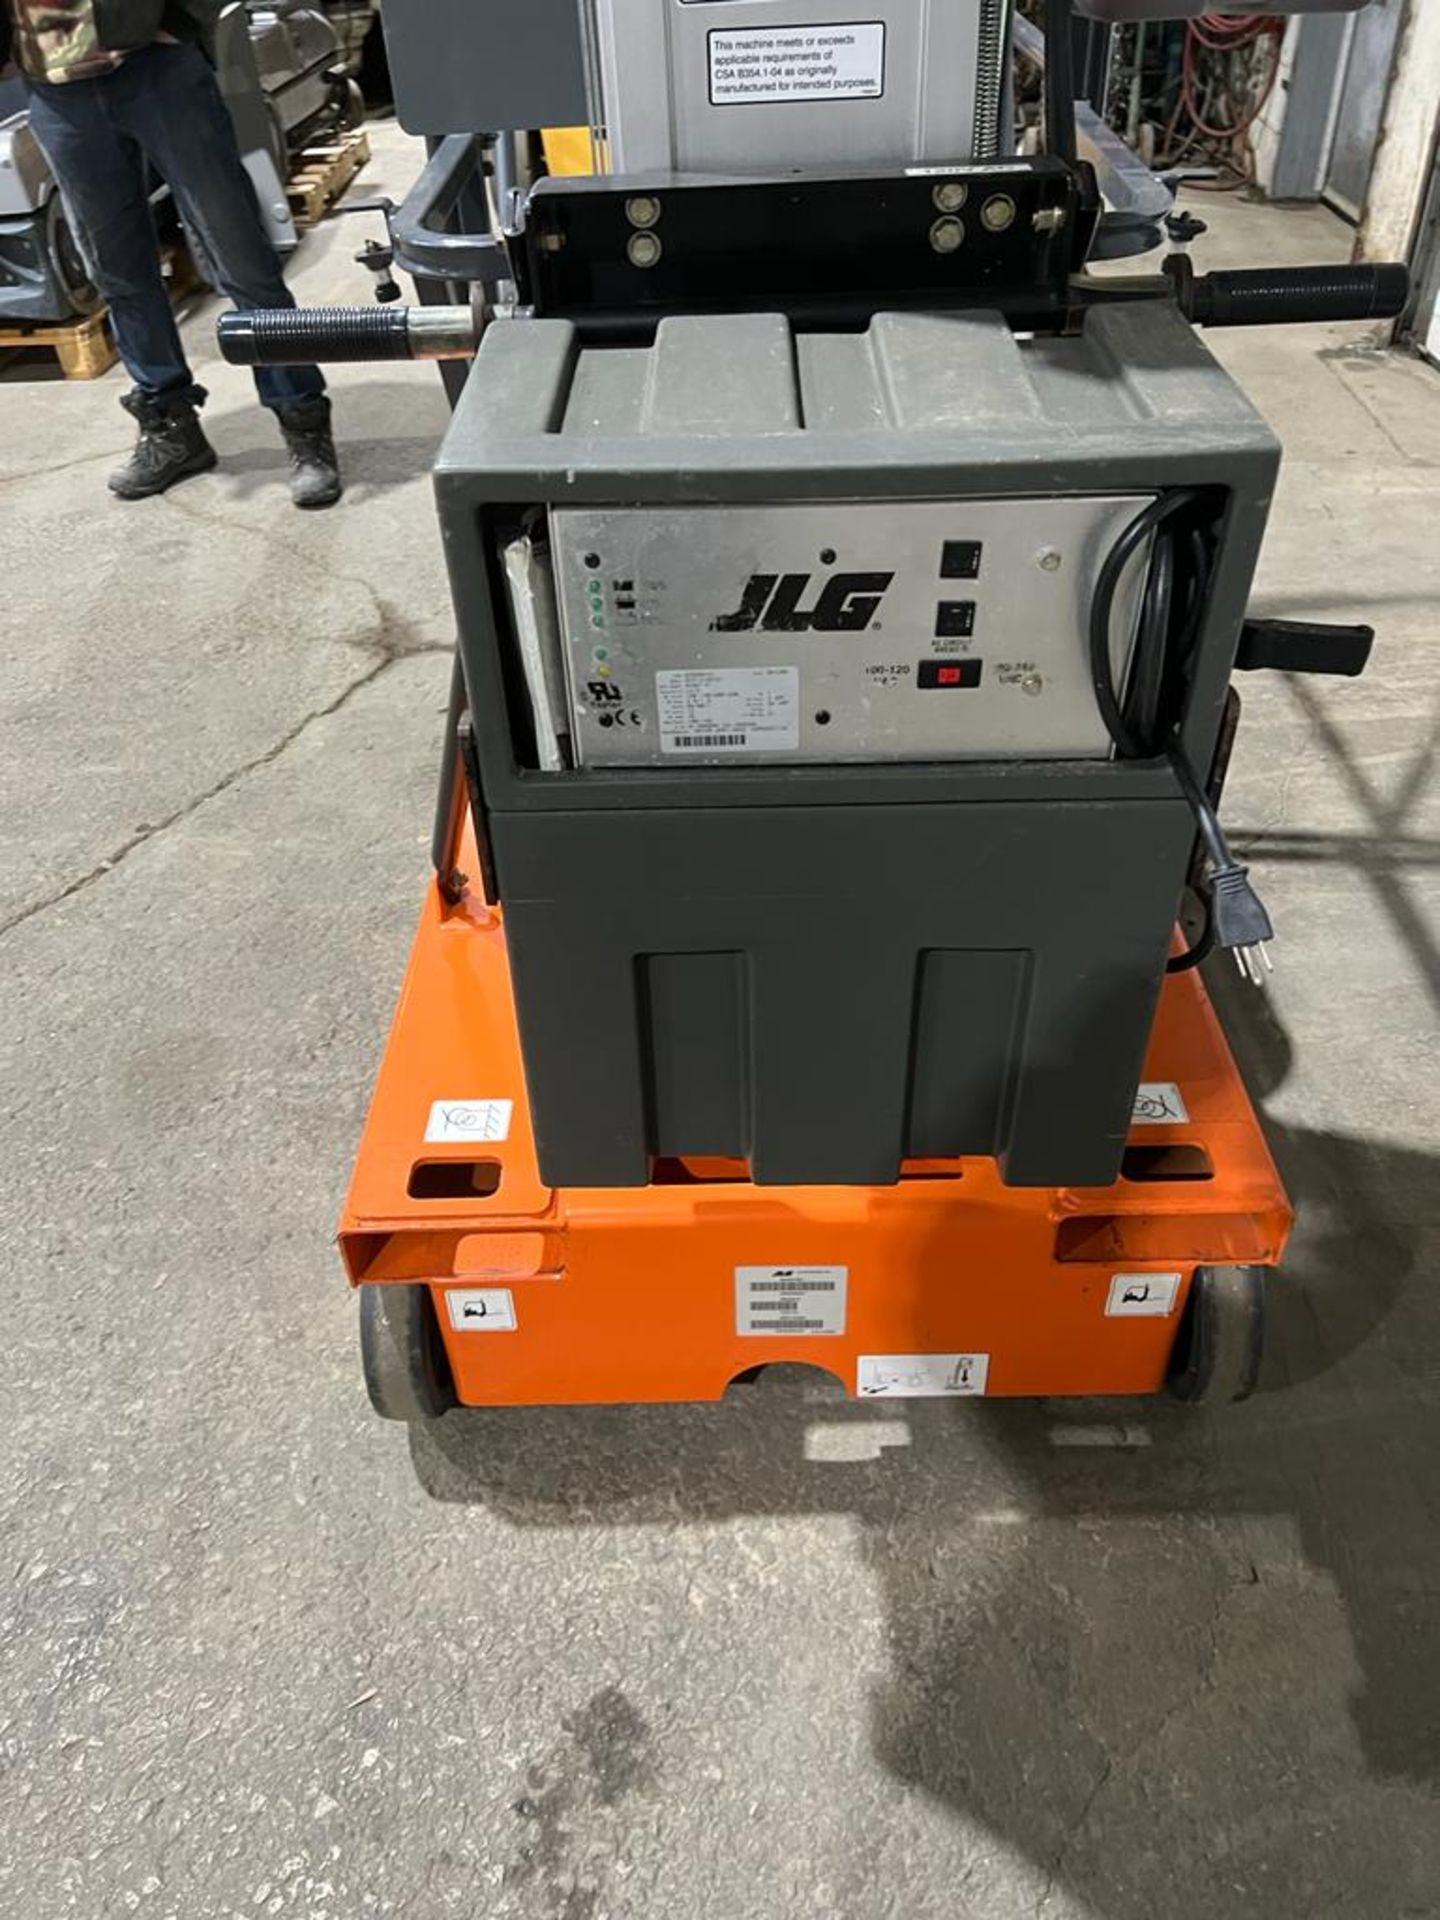 2009 JLG 15SP 400 LB. CAPACITY 24V ELECTRIC ORDER PICKERS WITH 180" MAX. LIFT HEIGHT, BUILT-IN - Image 3 of 4